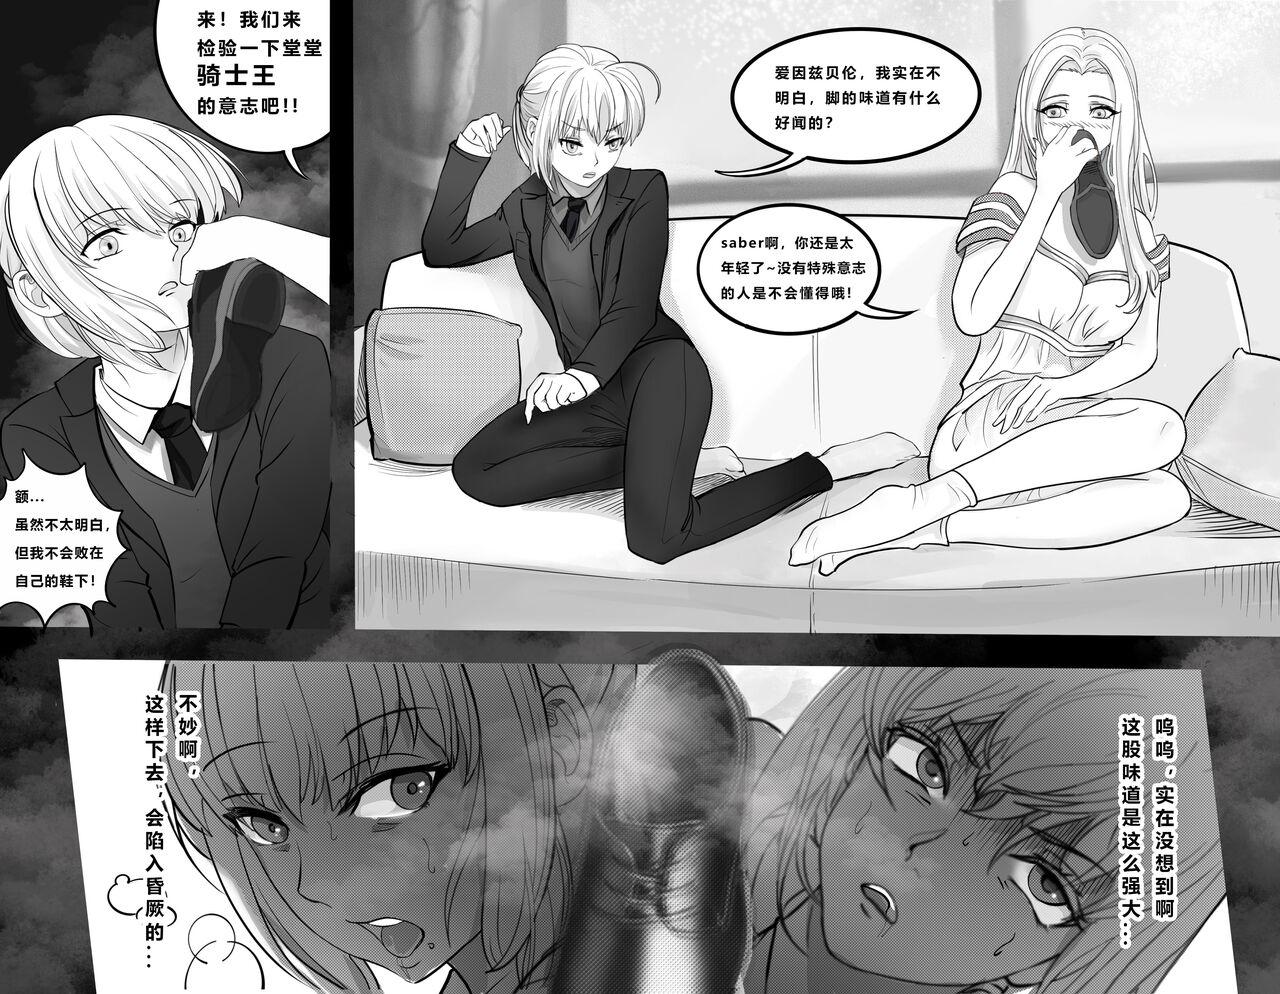 Sensual FATE REQUEST CHINESE VERSION - Fate stay night Amateurporn - Page 1